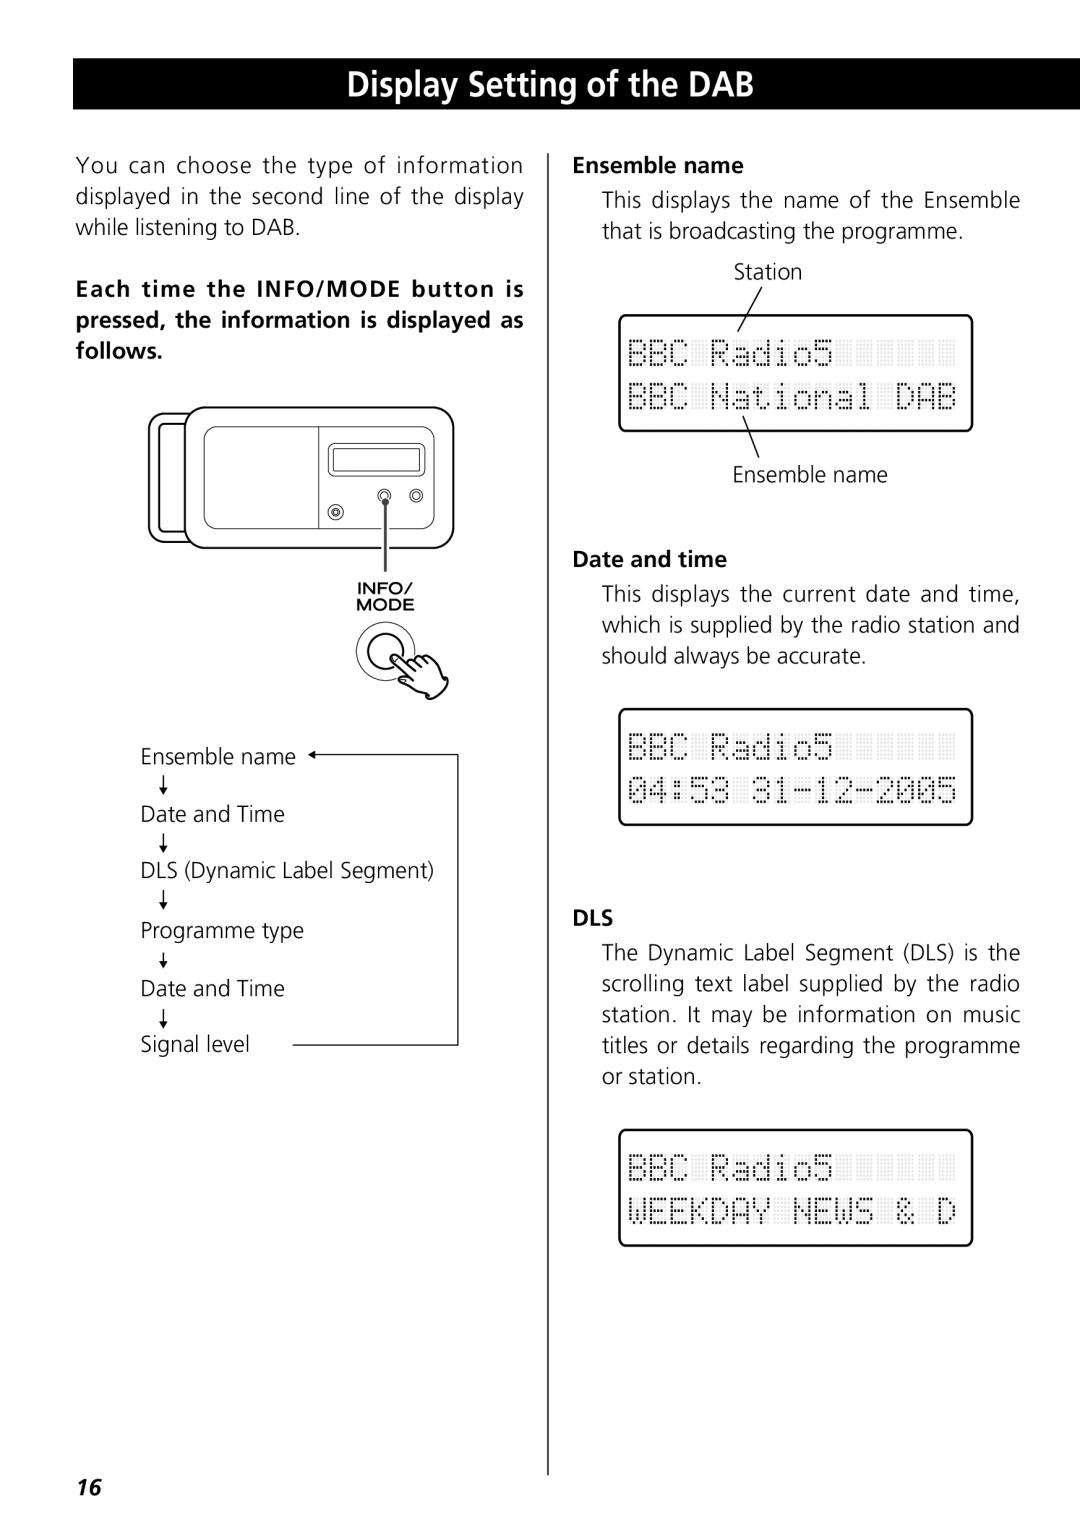 Teac R-3 owner manual Display Setting of the DAB, Ensemble name, Date and time 